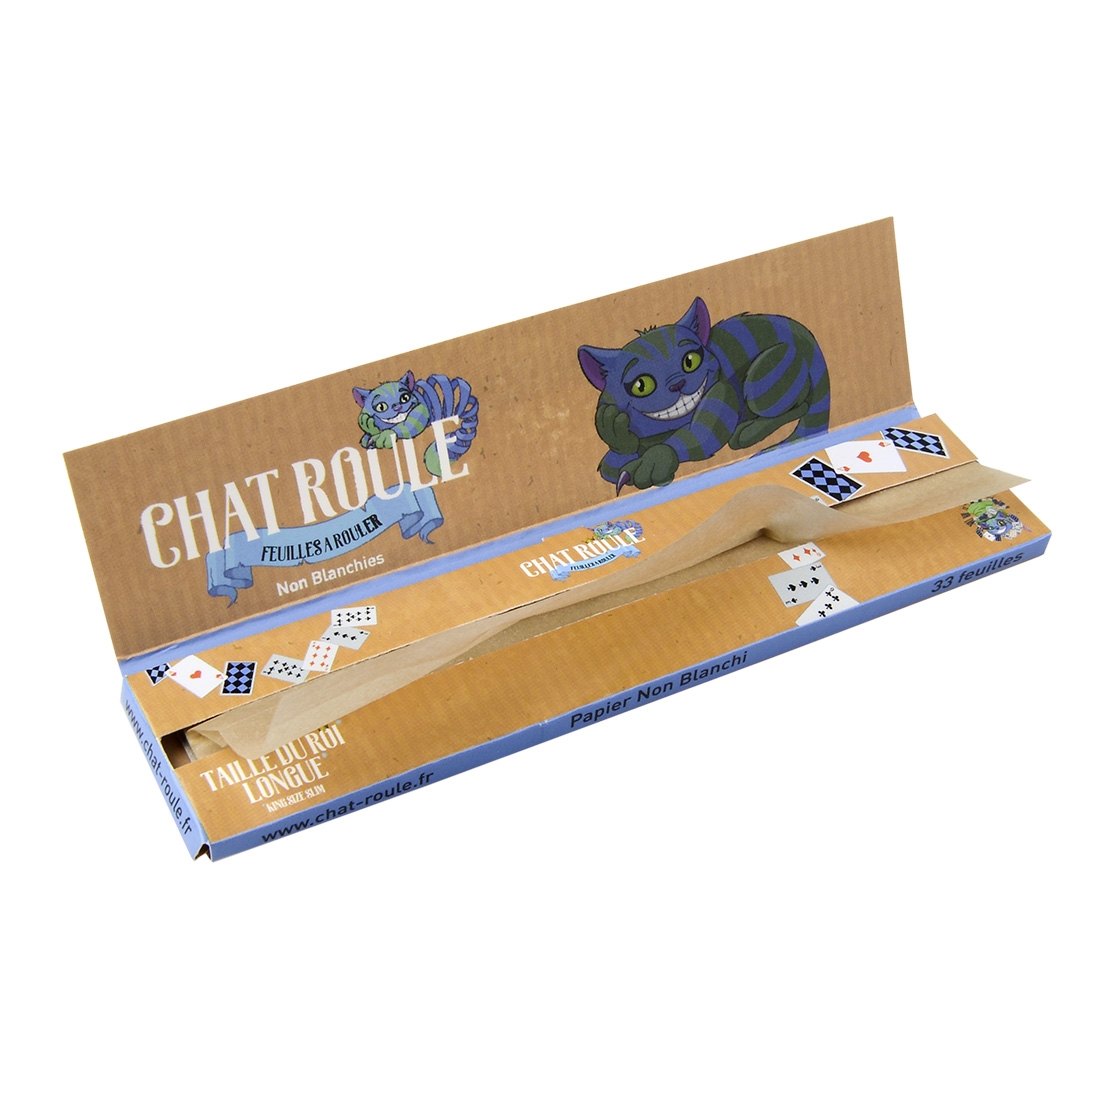 chat roule king size slim non blanchies